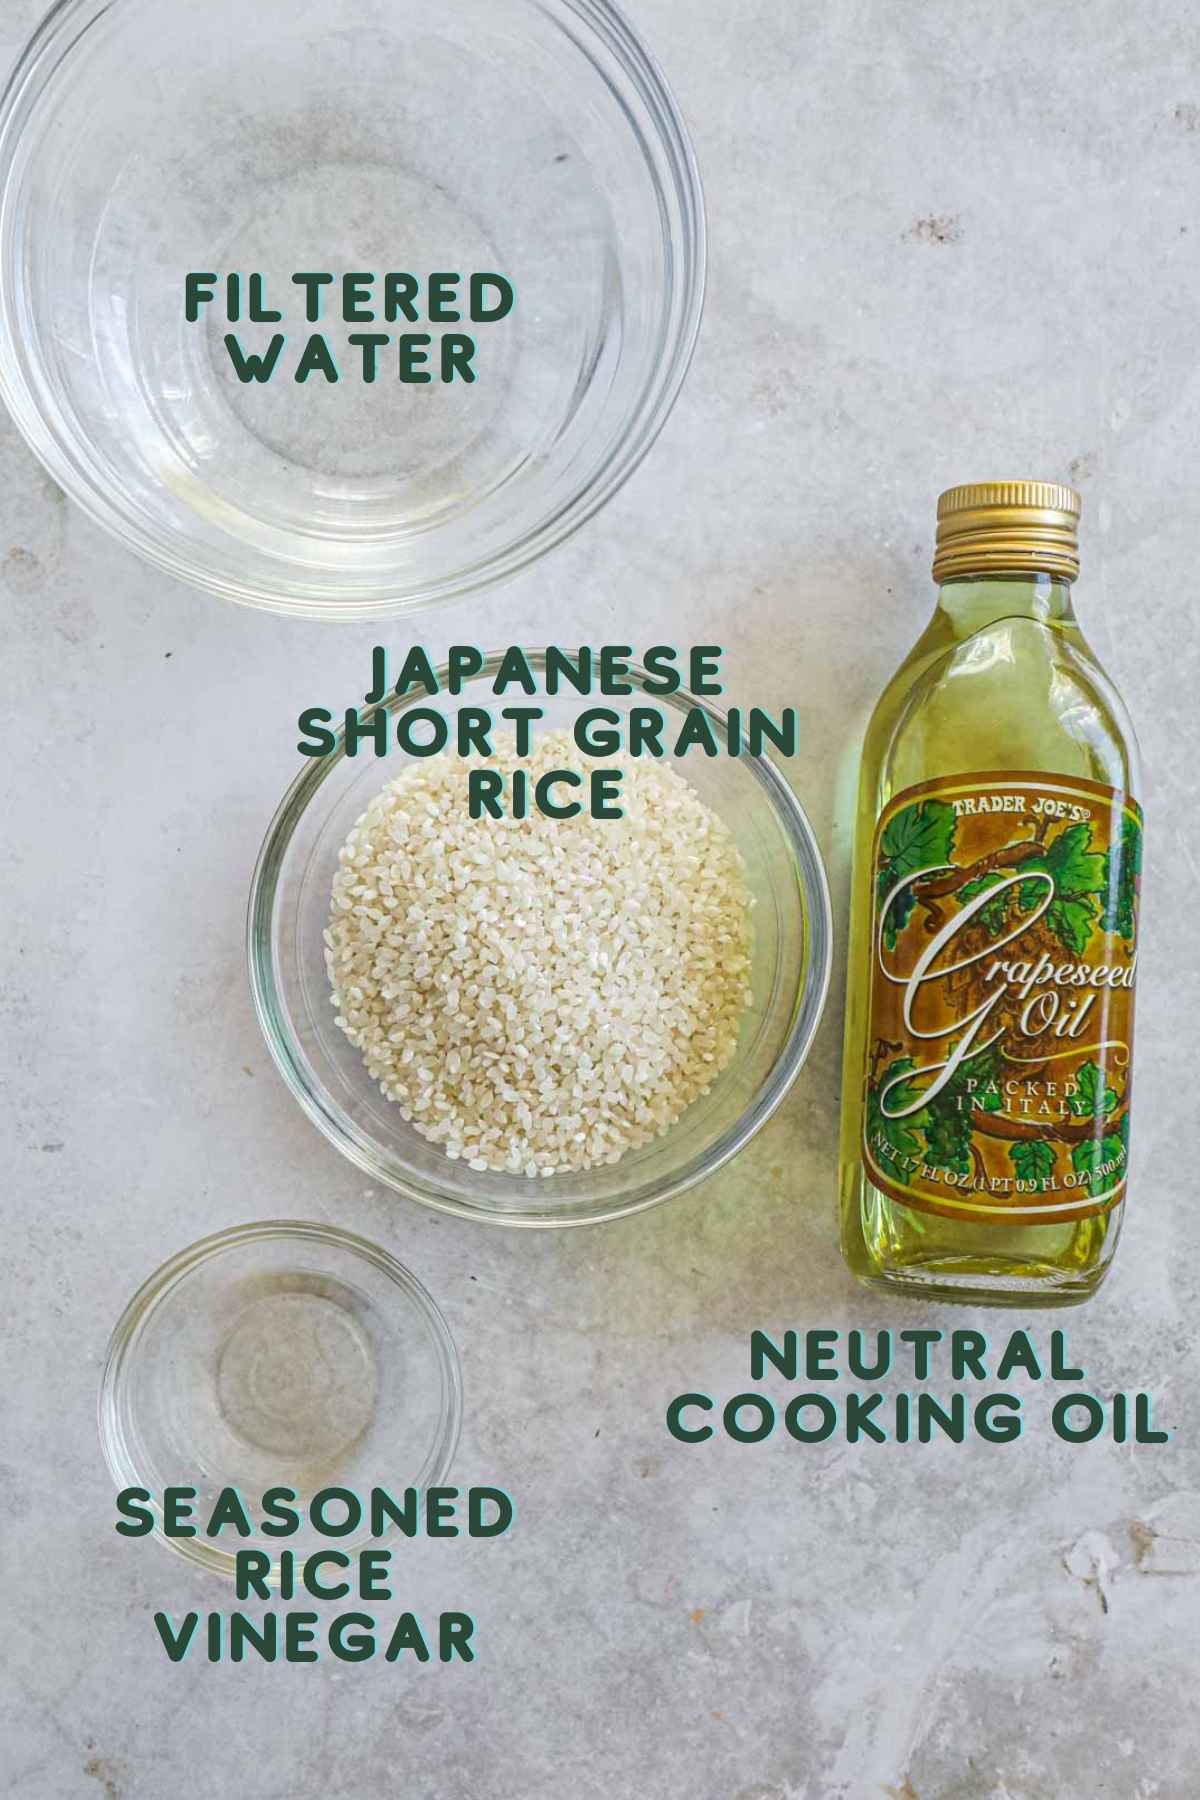 Ingredients to make crispy Japanese rice cakes, including Japanese short-grain rice, seasoned rice vinegar, water, and neutral cooking oil.